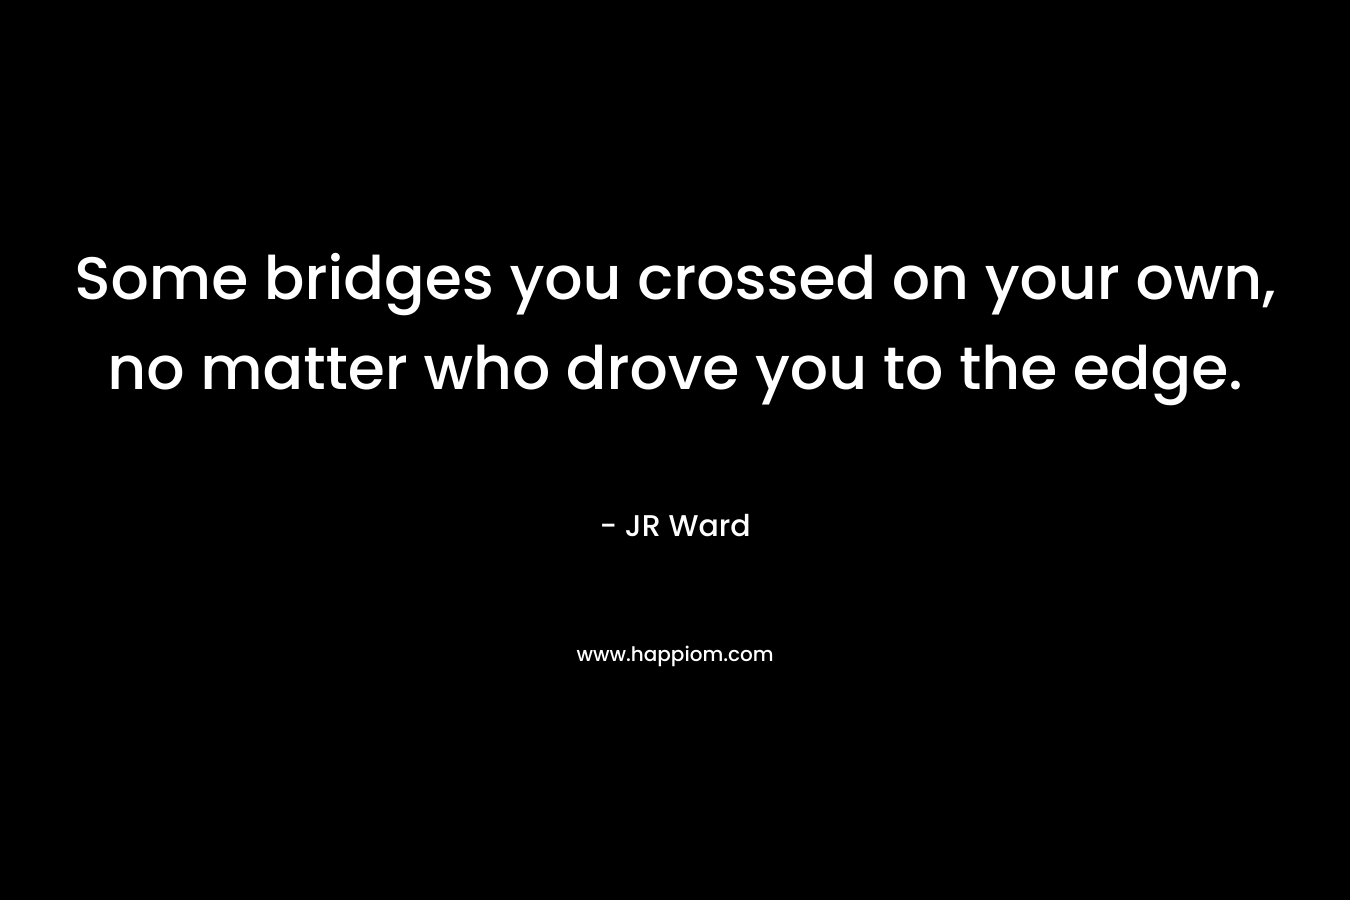 Some bridges you crossed on your own, no matter who drove you to the edge. – JR Ward